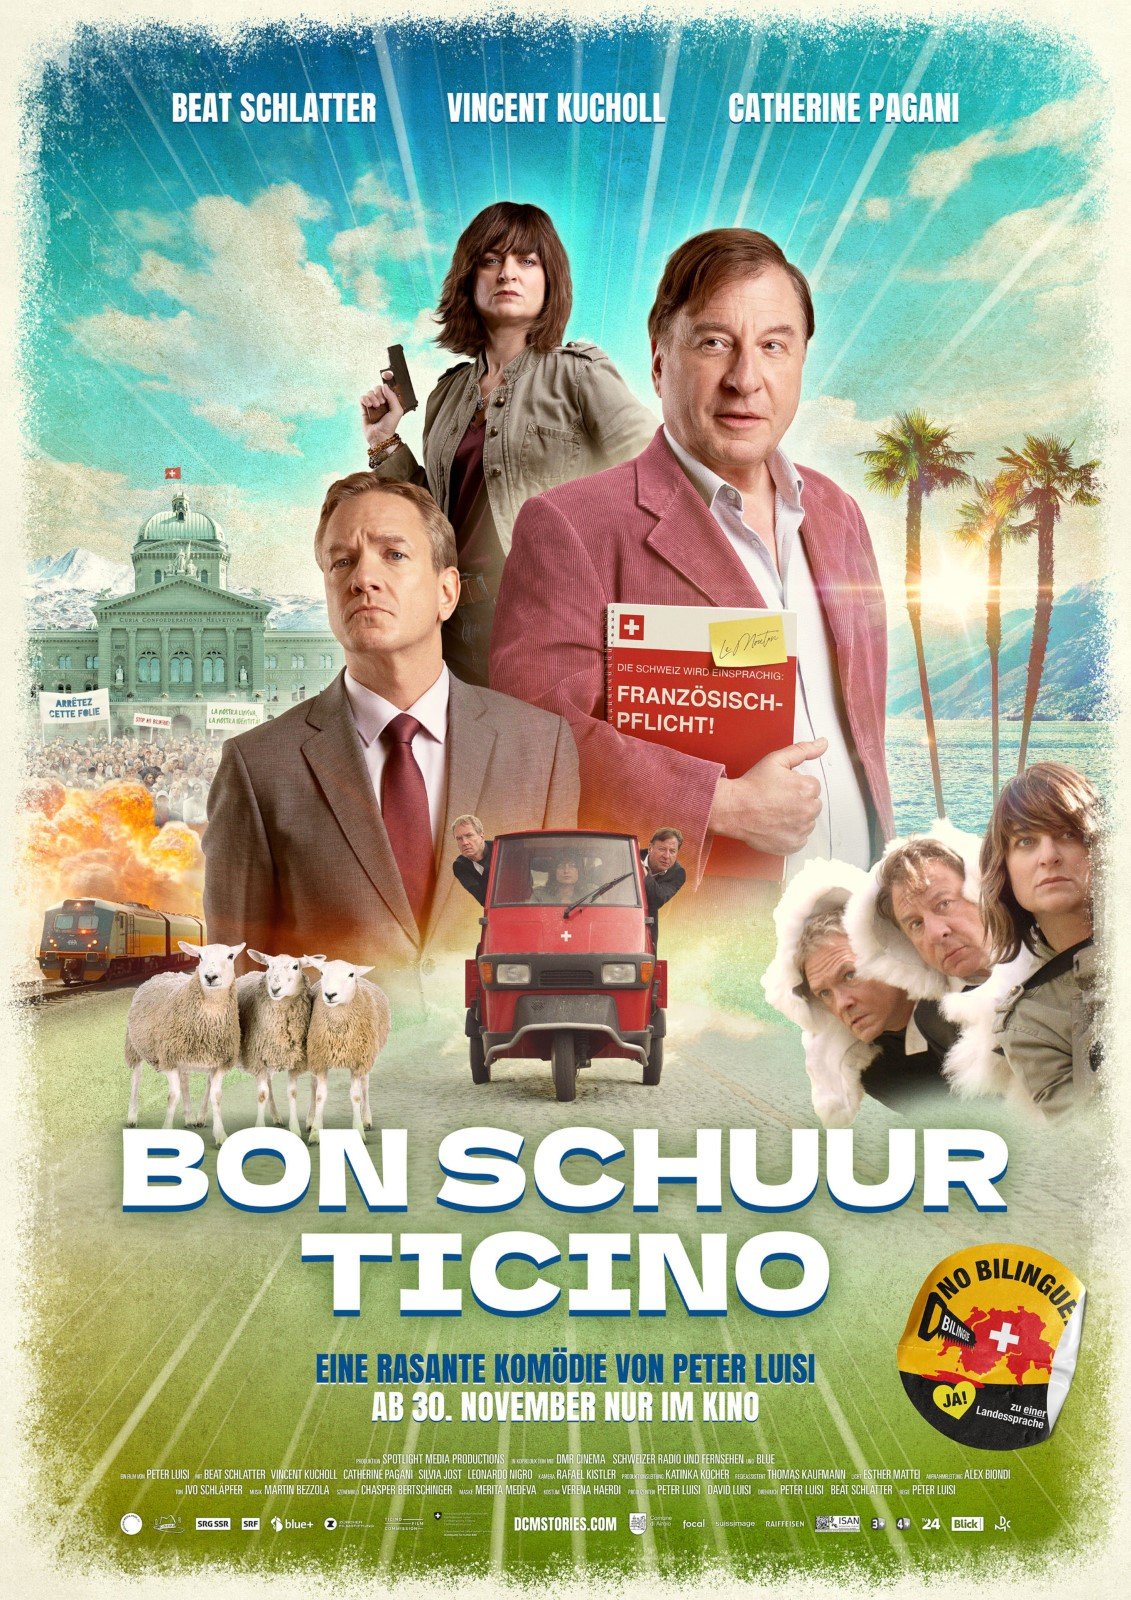 Bon Schuur Ticino (Bonjour Switzerland) showing in our 180-seat Balinese Theatre at 4:30PM at our 47-seat theatre at 7:50PM)  *** Derek’s Pick of the Week *** 